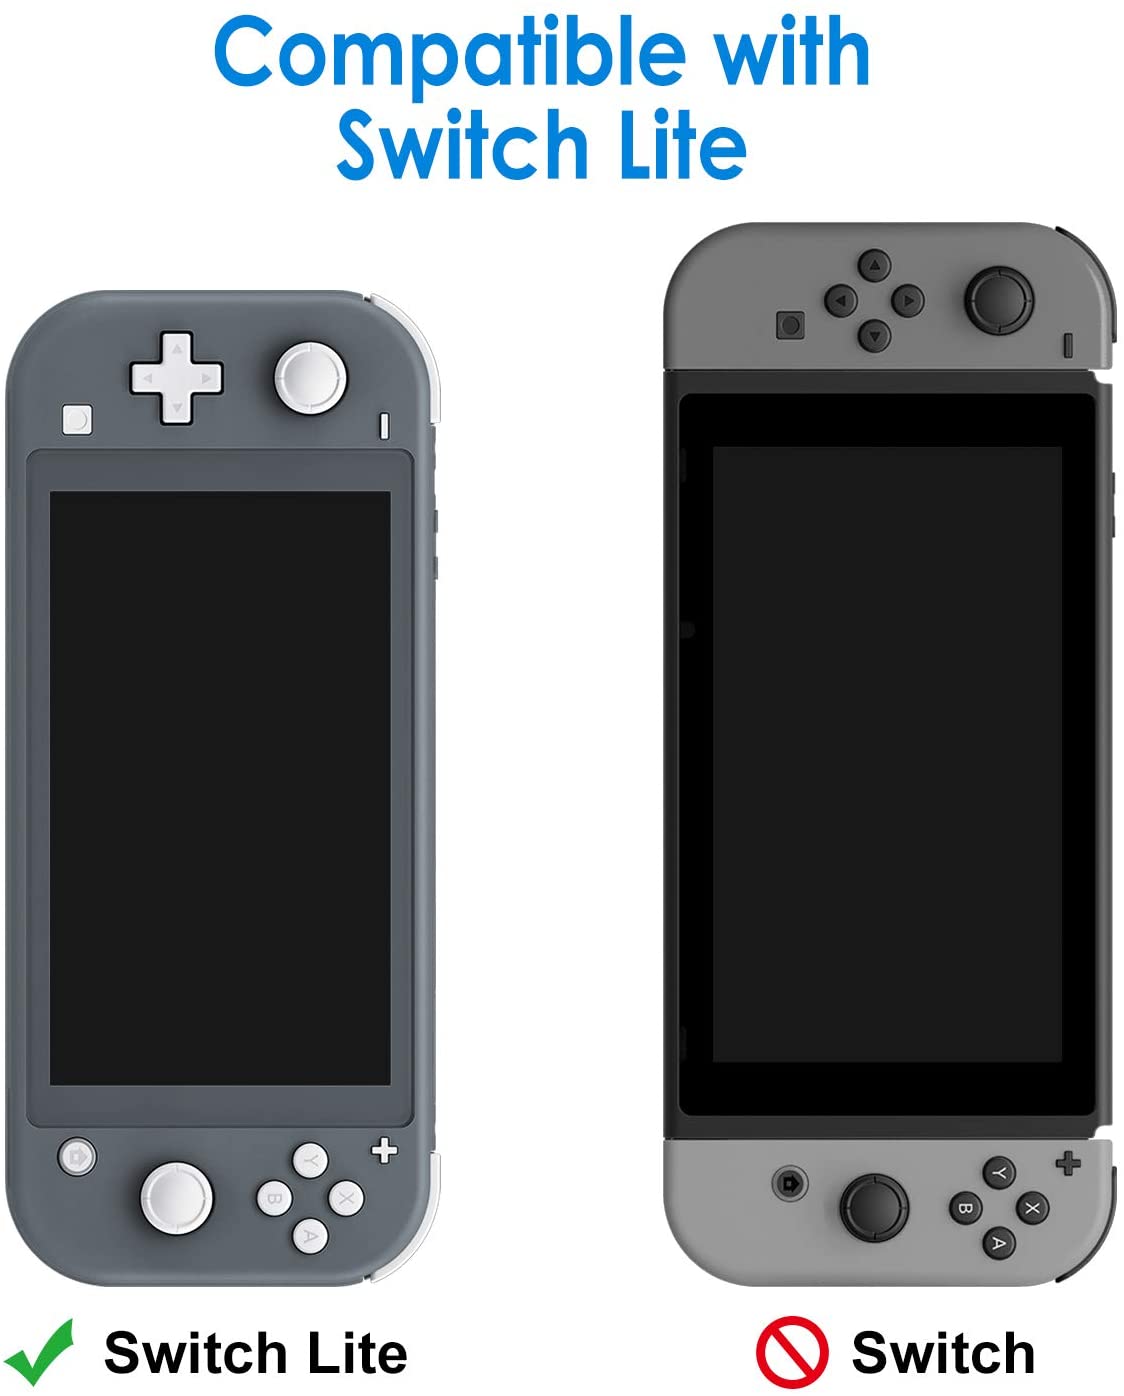 JETech Protective Case for Nintendo Switch Lite 2019, Grip Cover with Shock-Absorption and Anti-Scratch Design, Grey - e4cents